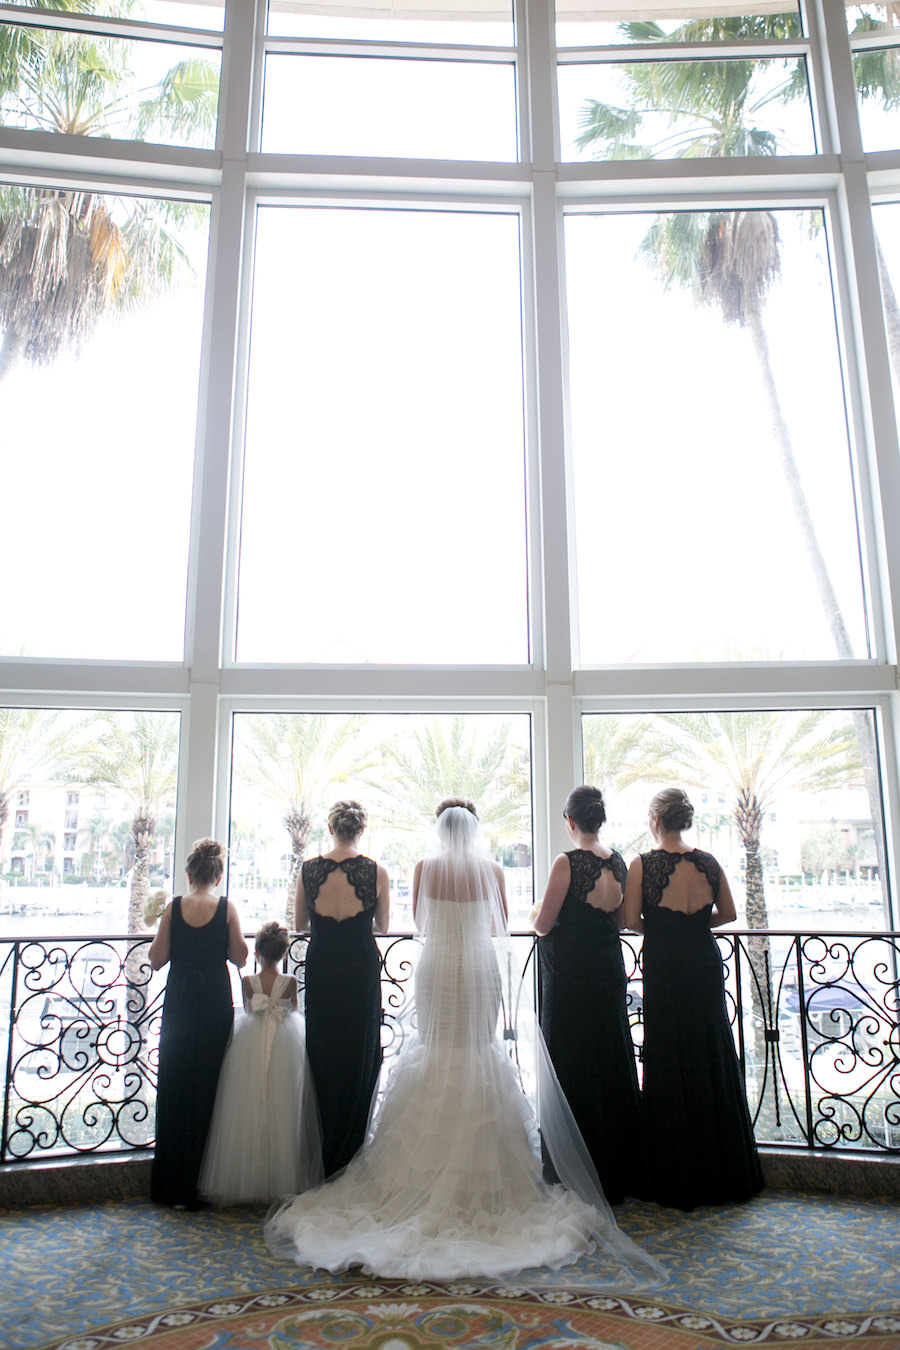 Bridal Party Wedding Portrait at Tampa Wedding Venue Marriott Waterside in Black Lace Bridesmaid Dresses from Bella Bridesmaid with Ivory Mermaid Style Wedding Gown | Wedding Photographer Carrie Wildes Photography